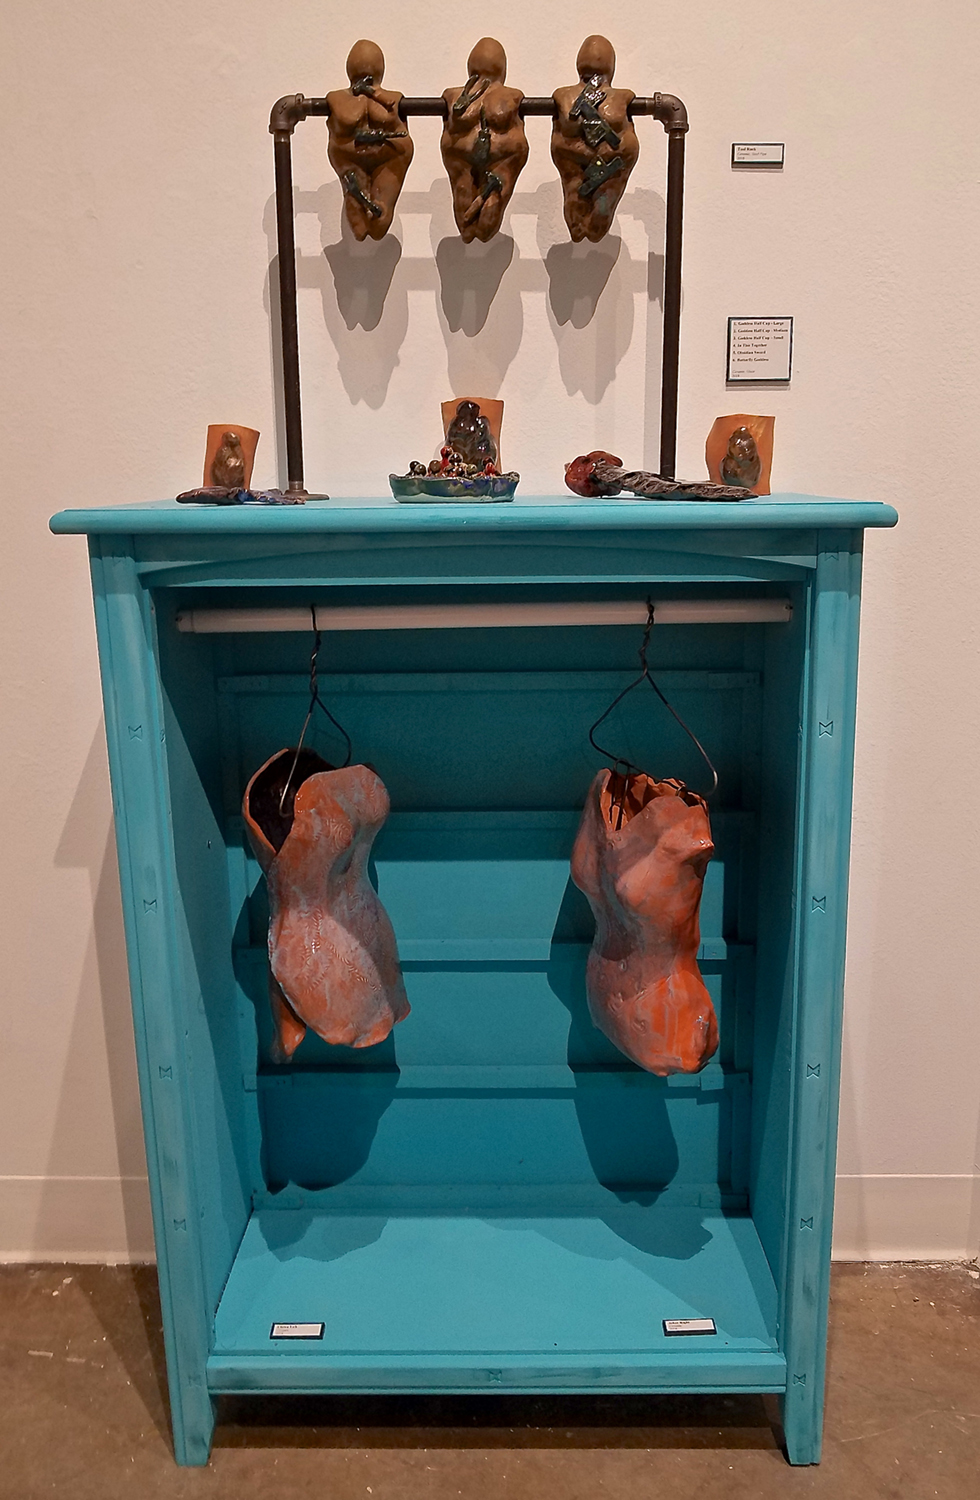 Blue dresser with an open front where we see two ceramic torsos suspended. Ceramic figures are on top. Image courtesy of Olena Ellis